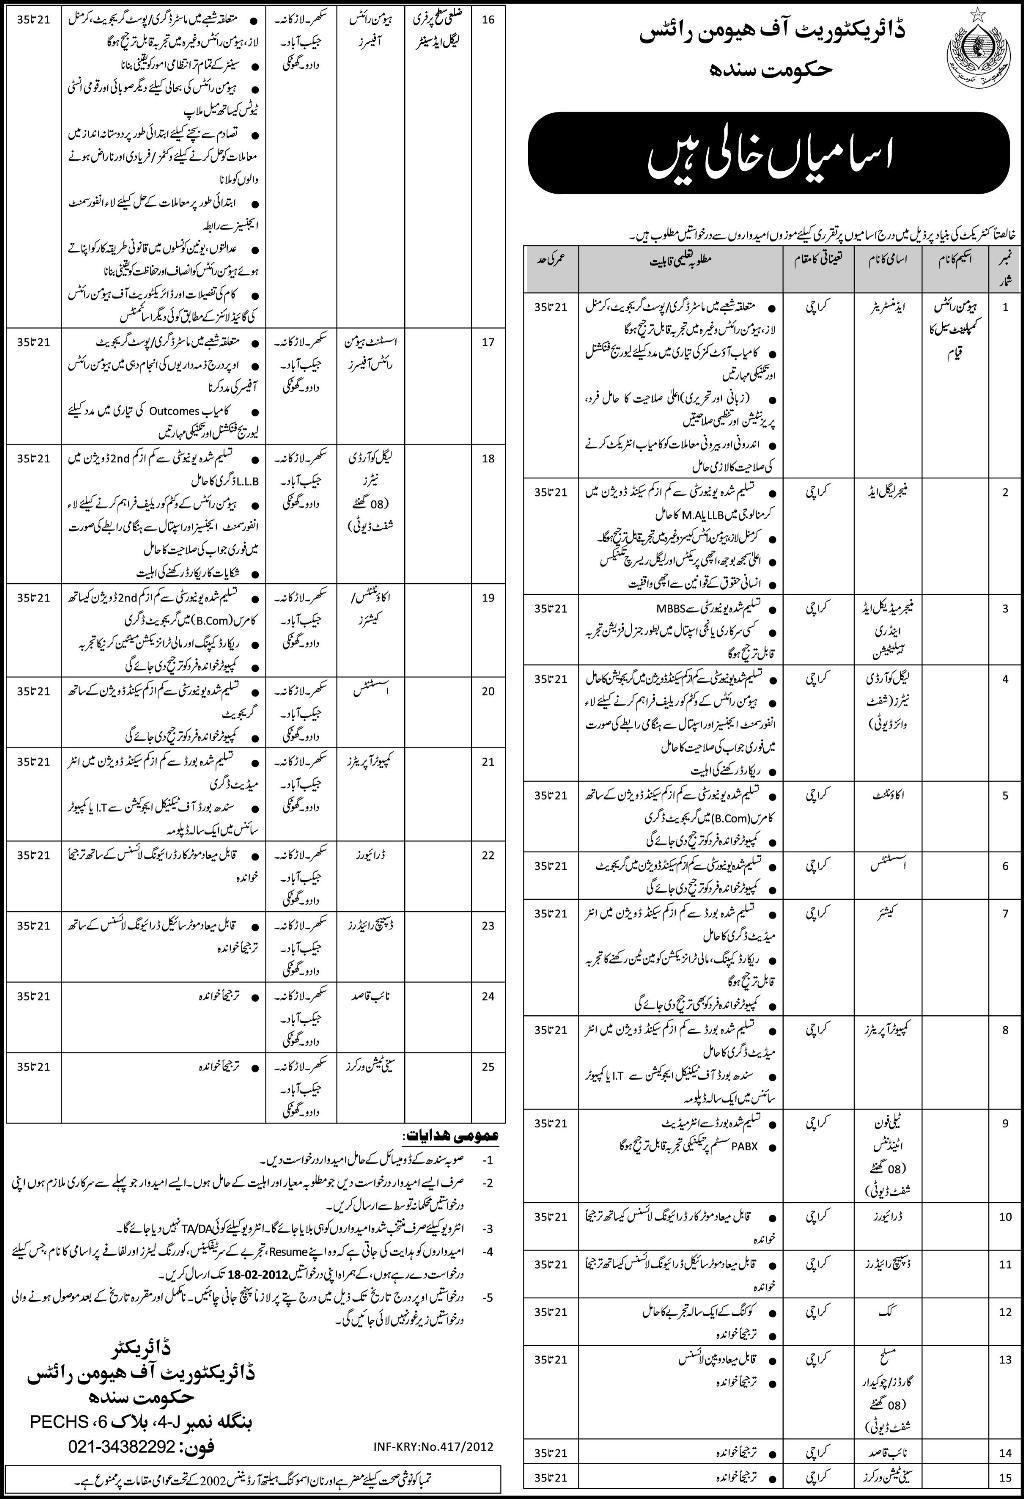 Directorate of Human Rights, Government of Sindh Jobs Opportunity